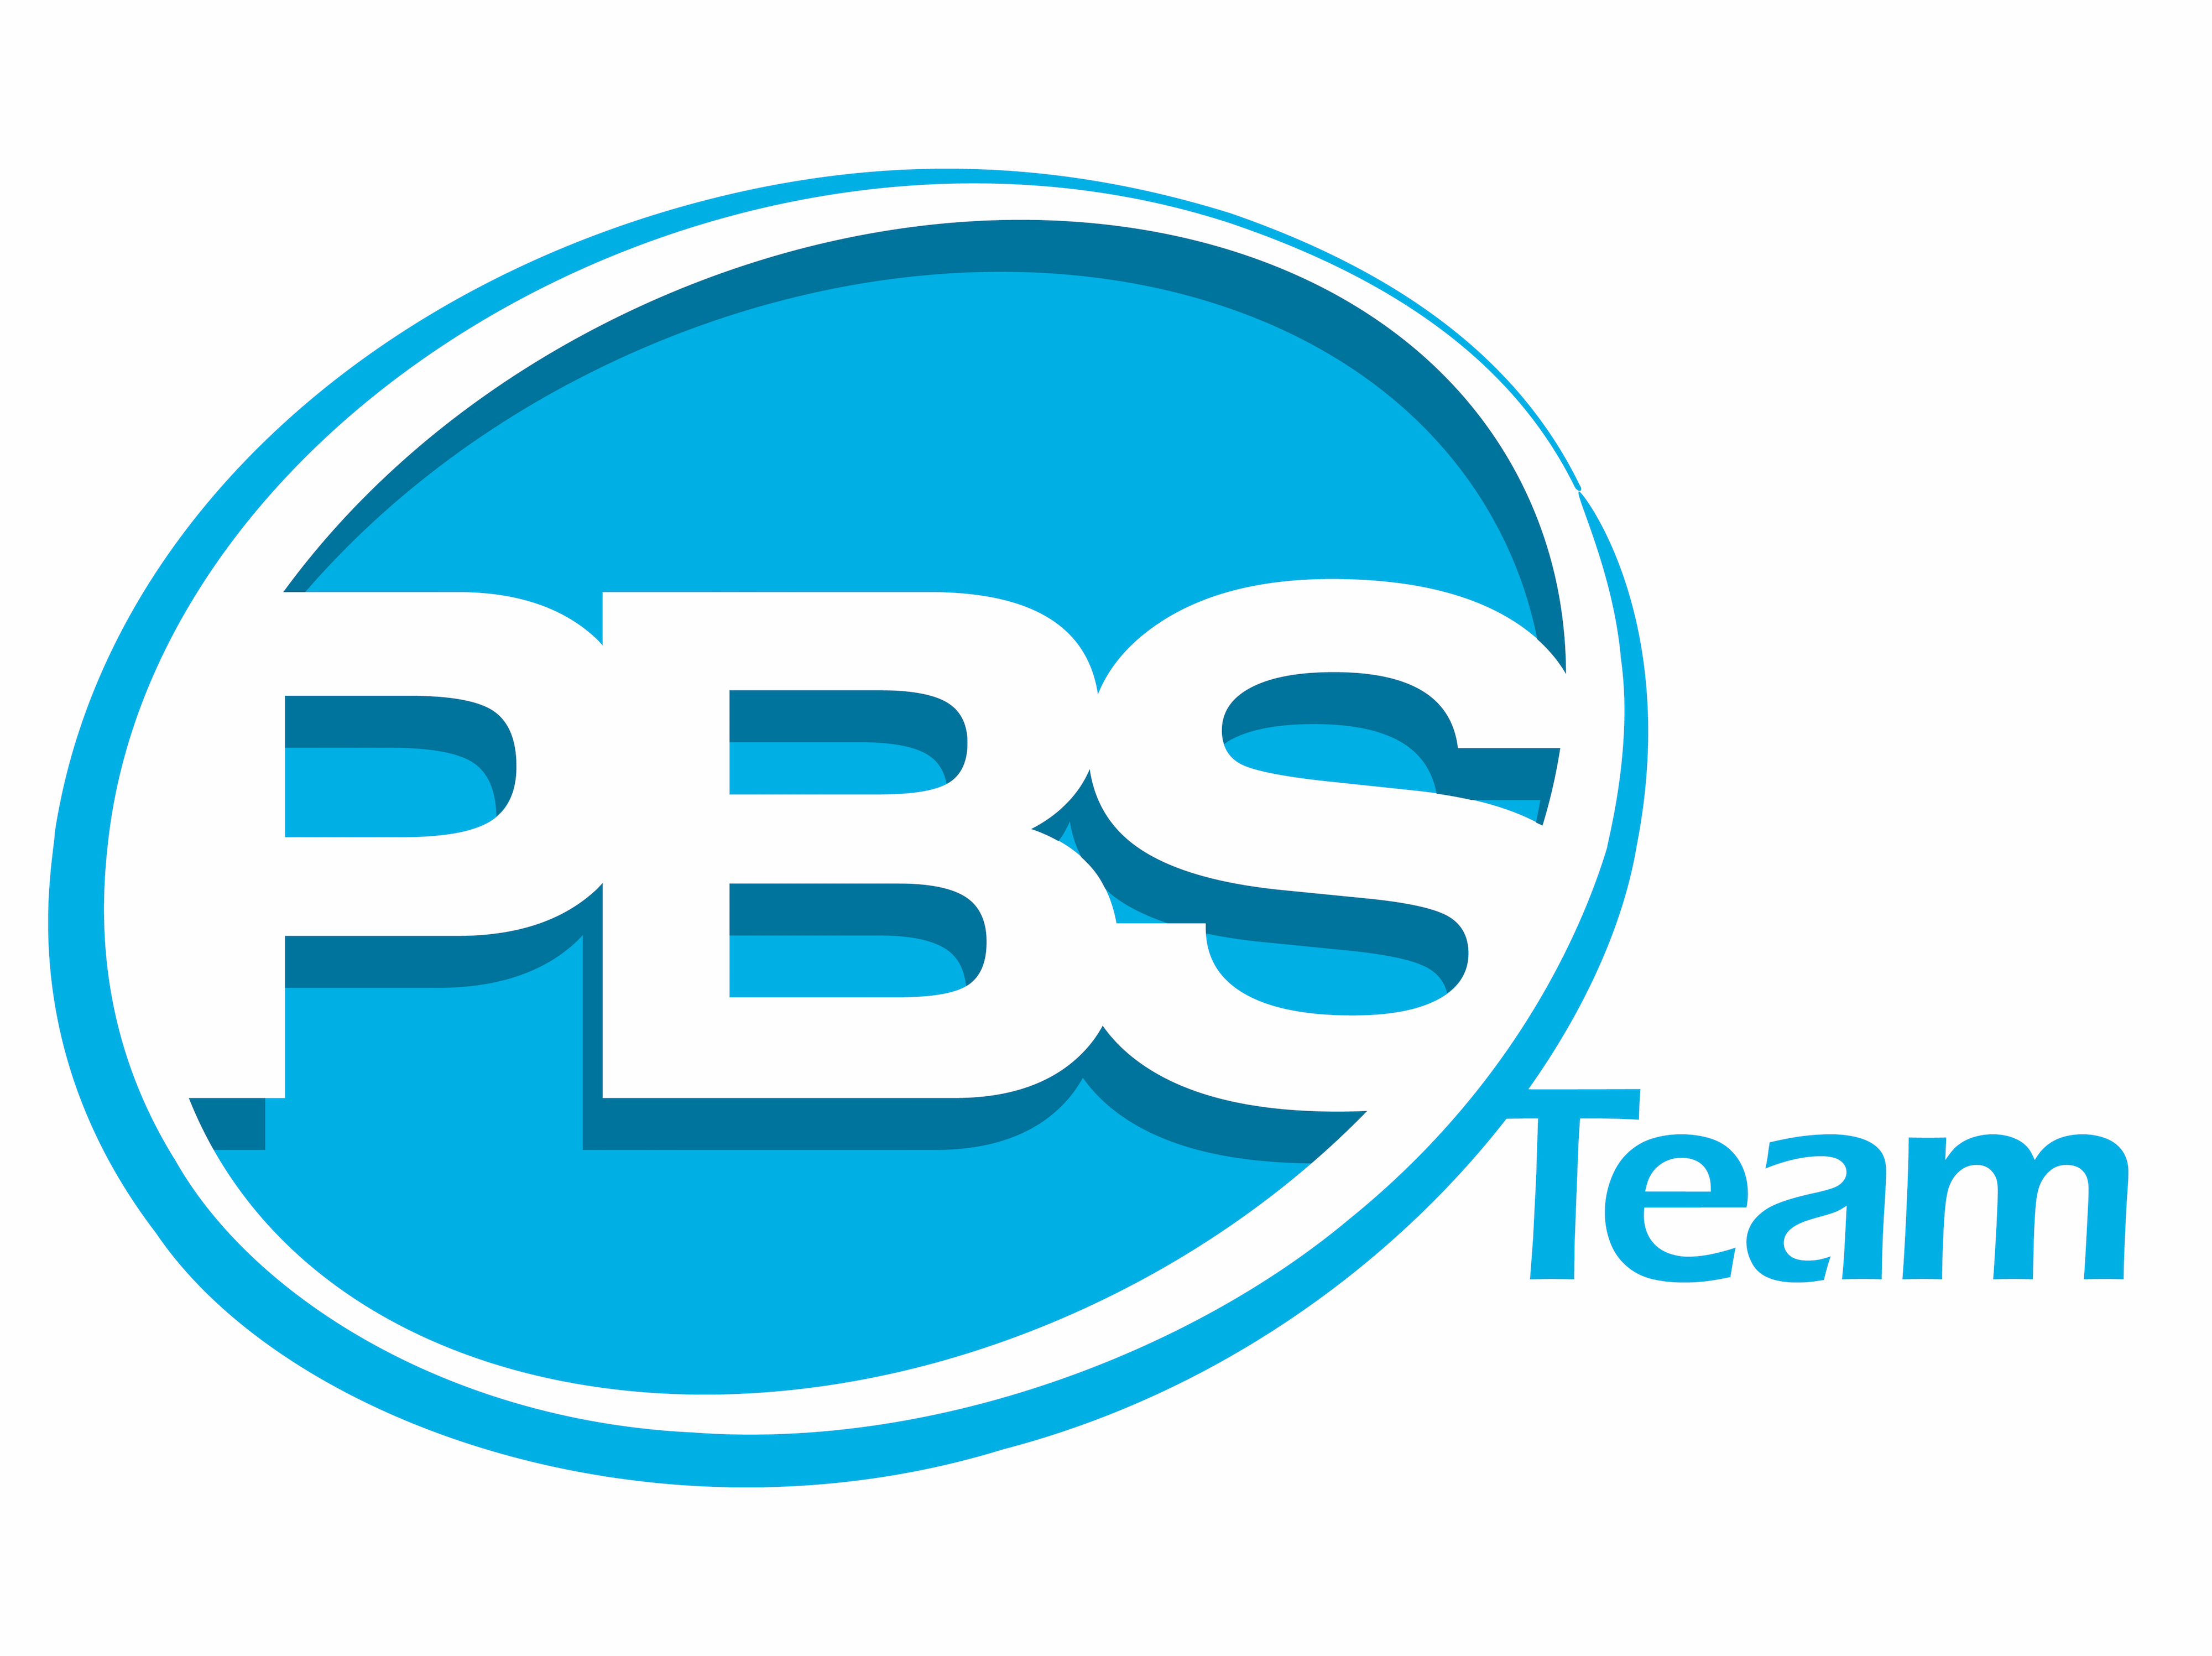 <strong><span style="color:#ffffff;"><span style="background-color:#000000;">PBS team</span></span></strong>